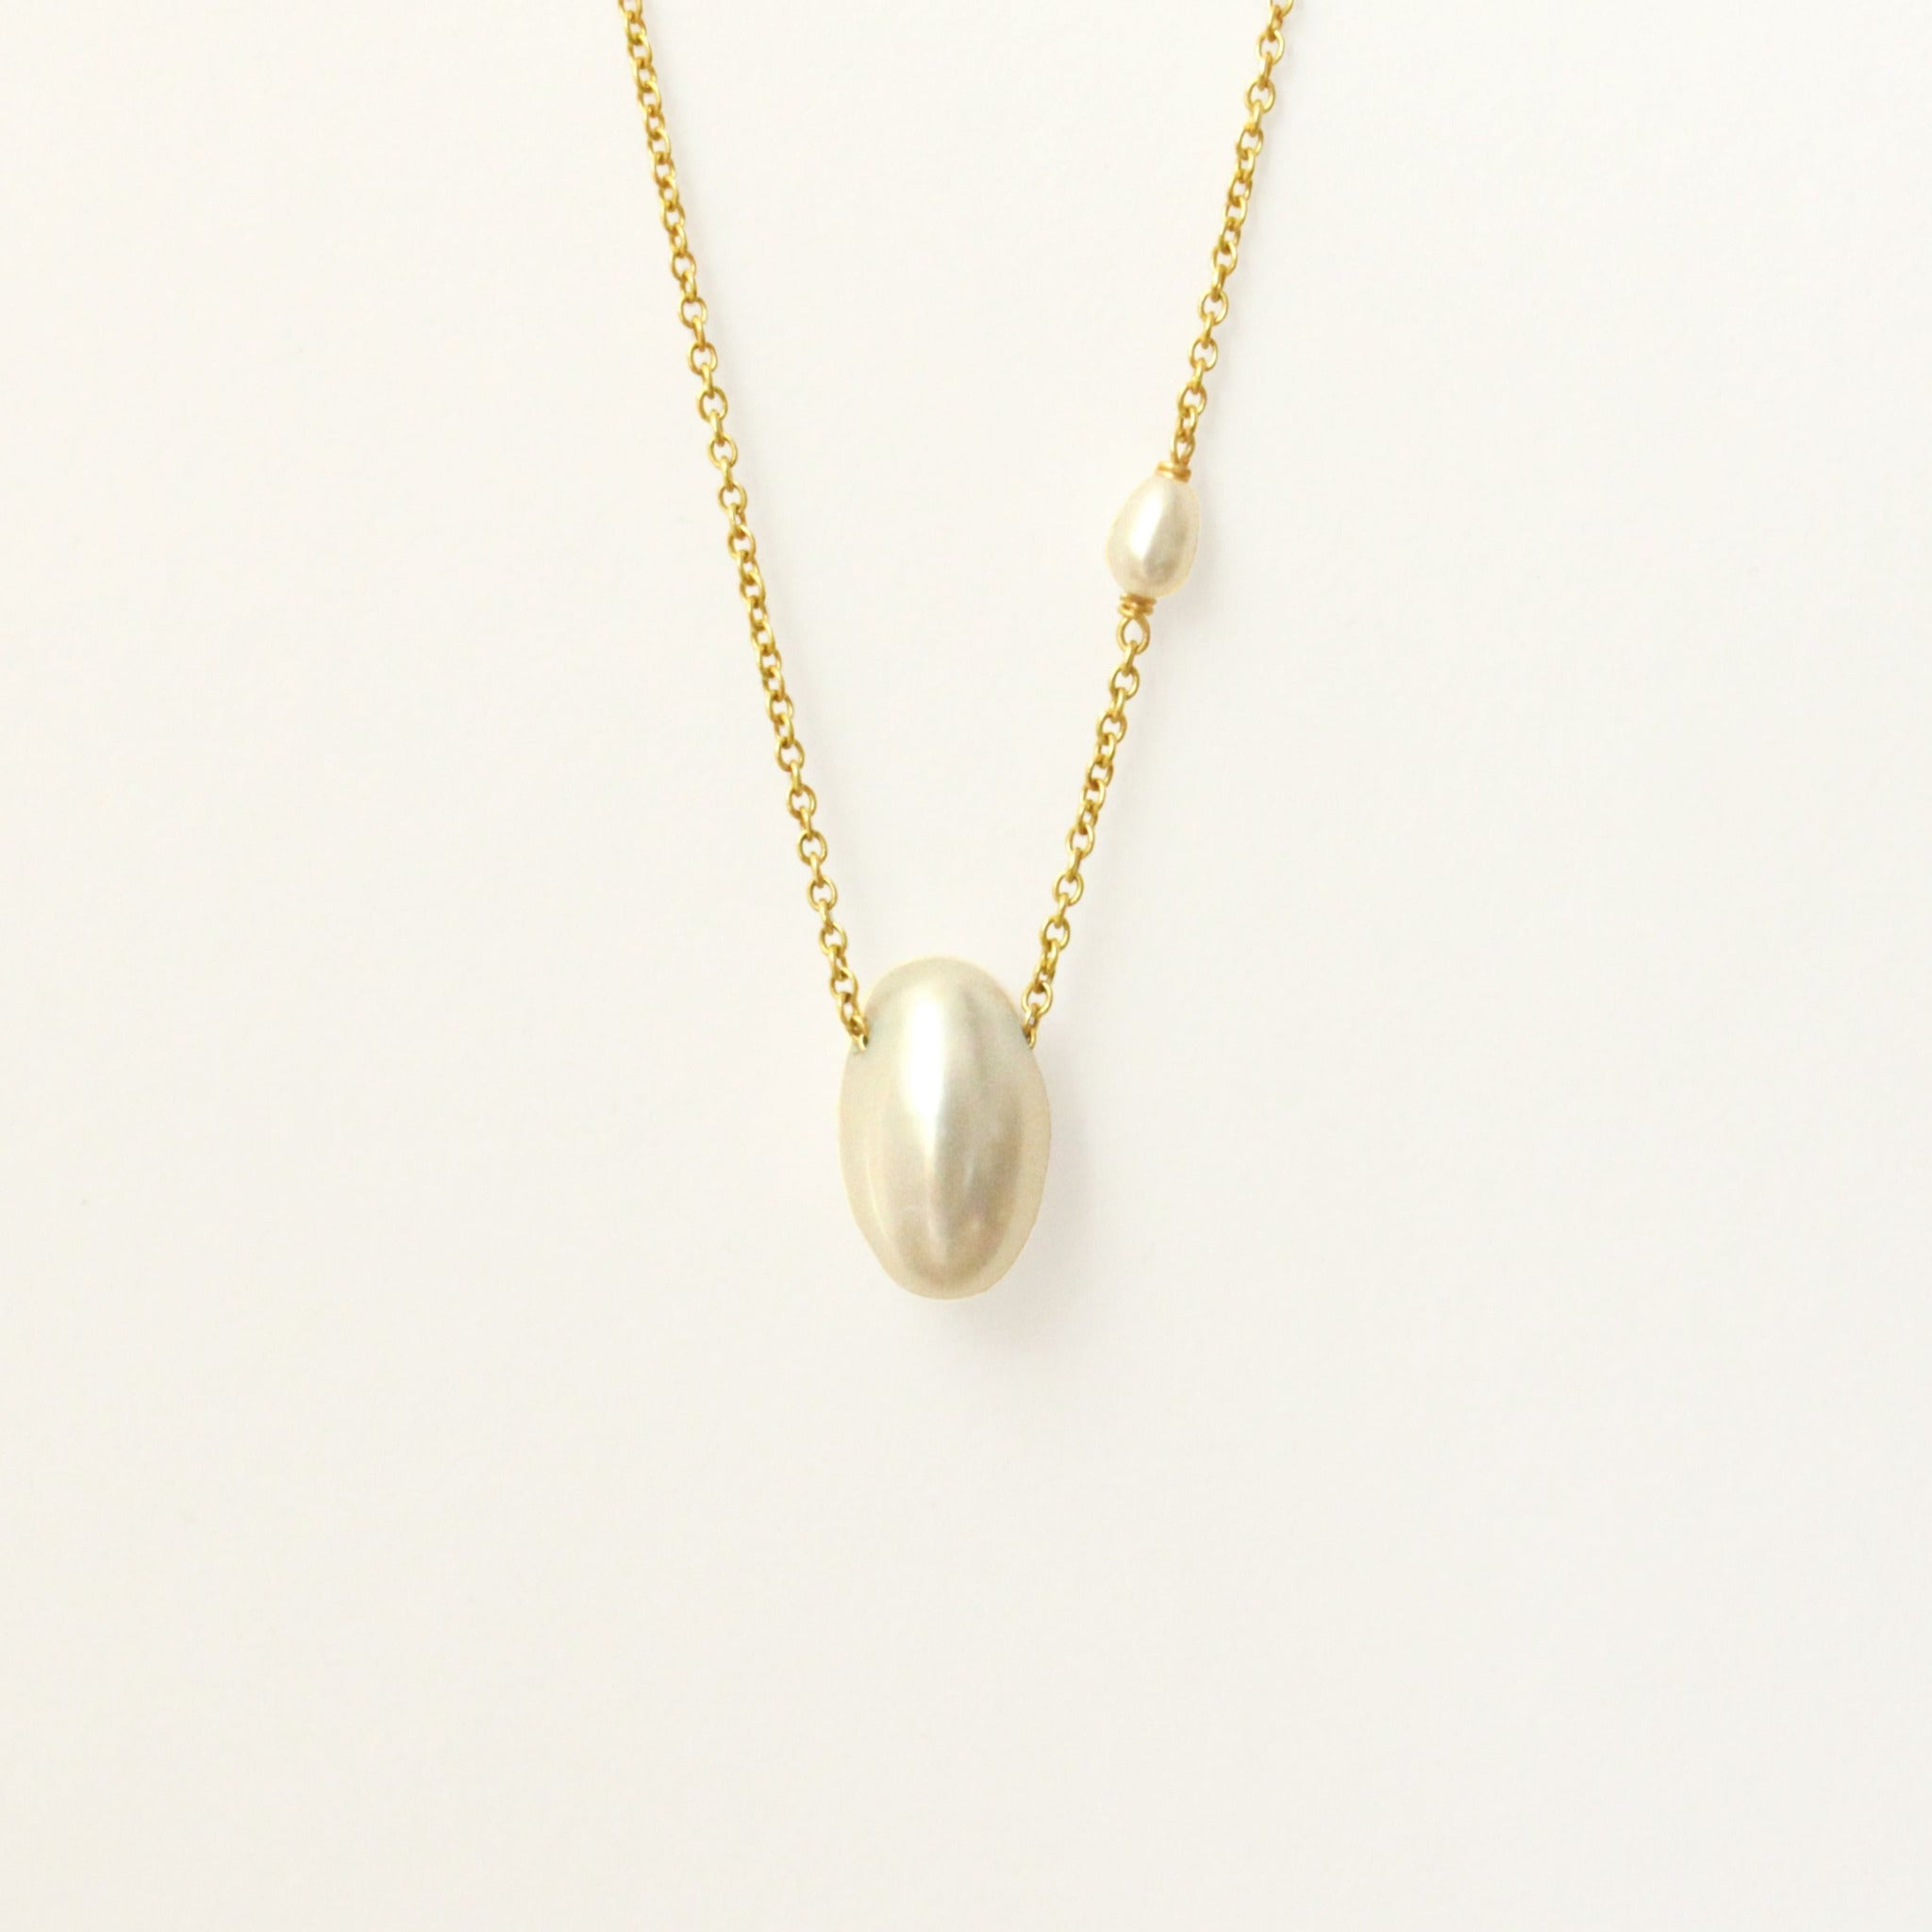 14k yellow gold necklace with one pearl drop and a small pearl accent